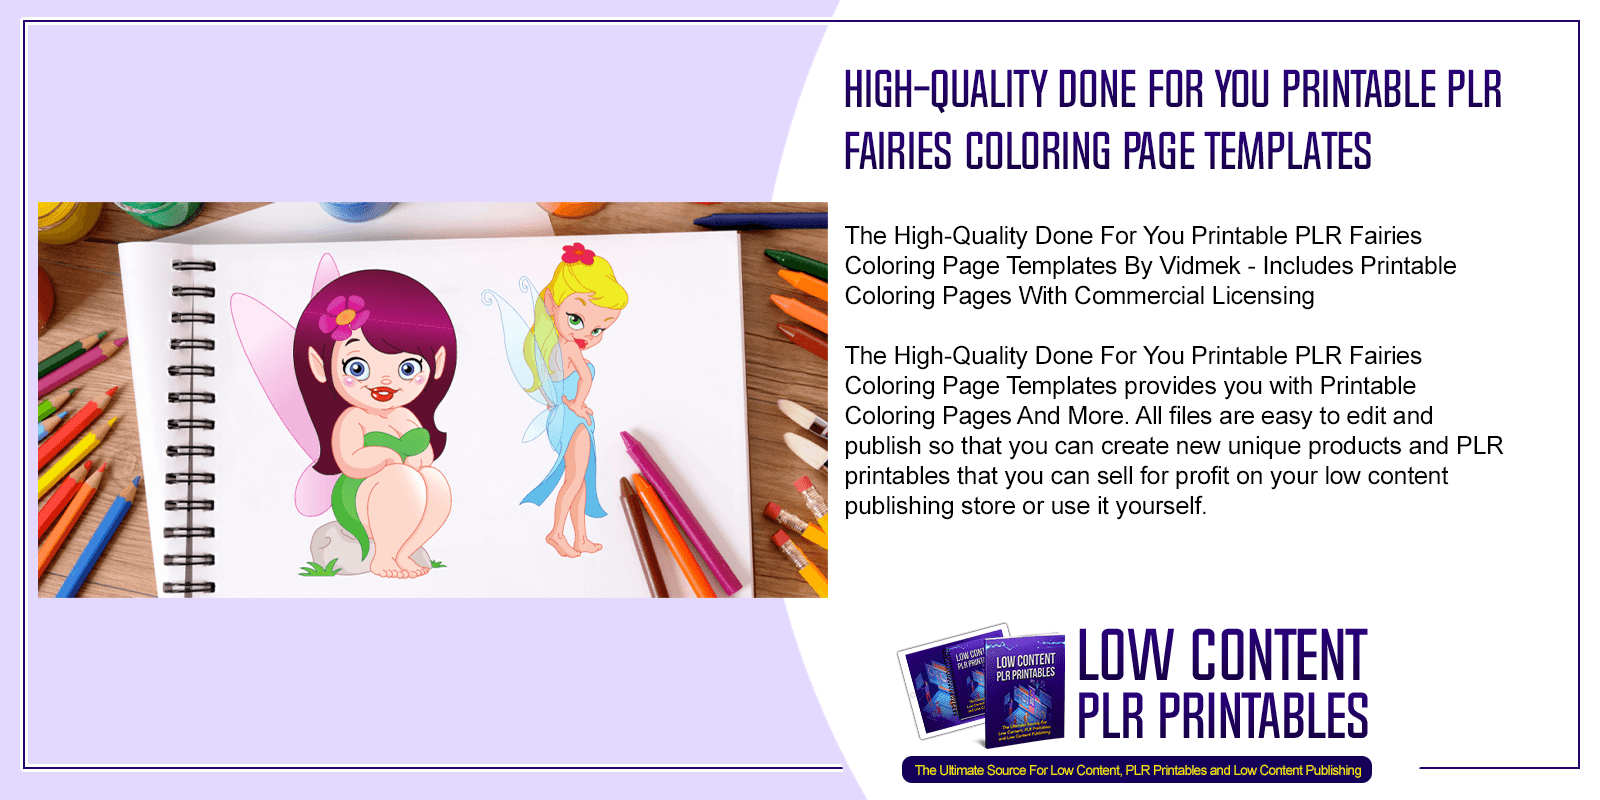 High Quality Done For You Printable PLR Fairies Coloring Page Templates